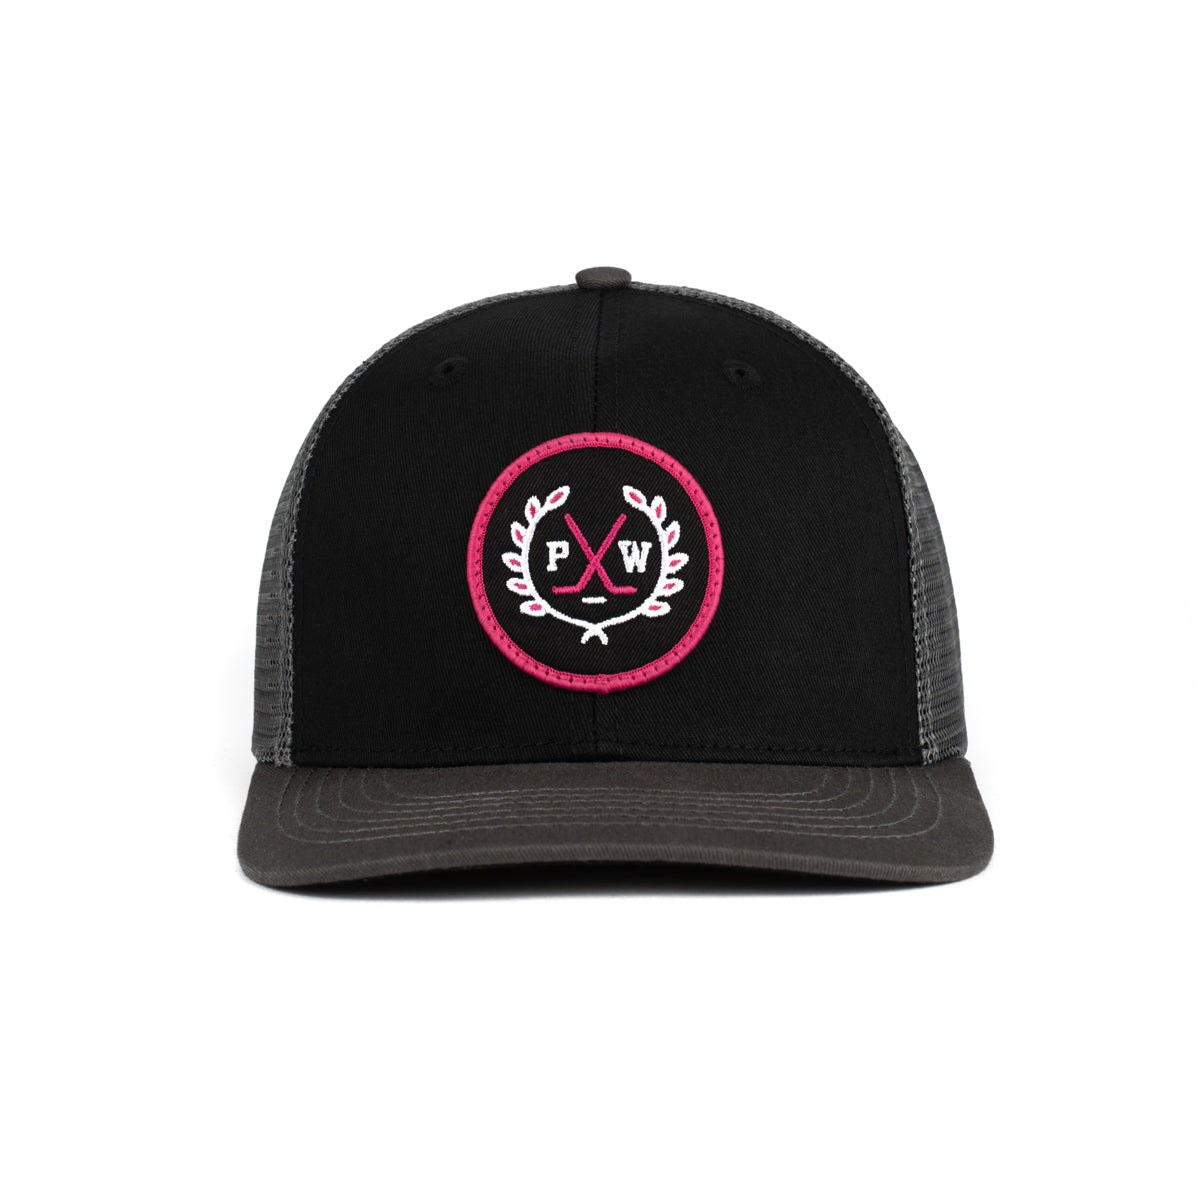 Pink Whitney Crest Patch Trucker Hat-Hats-Pink Whitney-Black-One Size-Barstool Sports